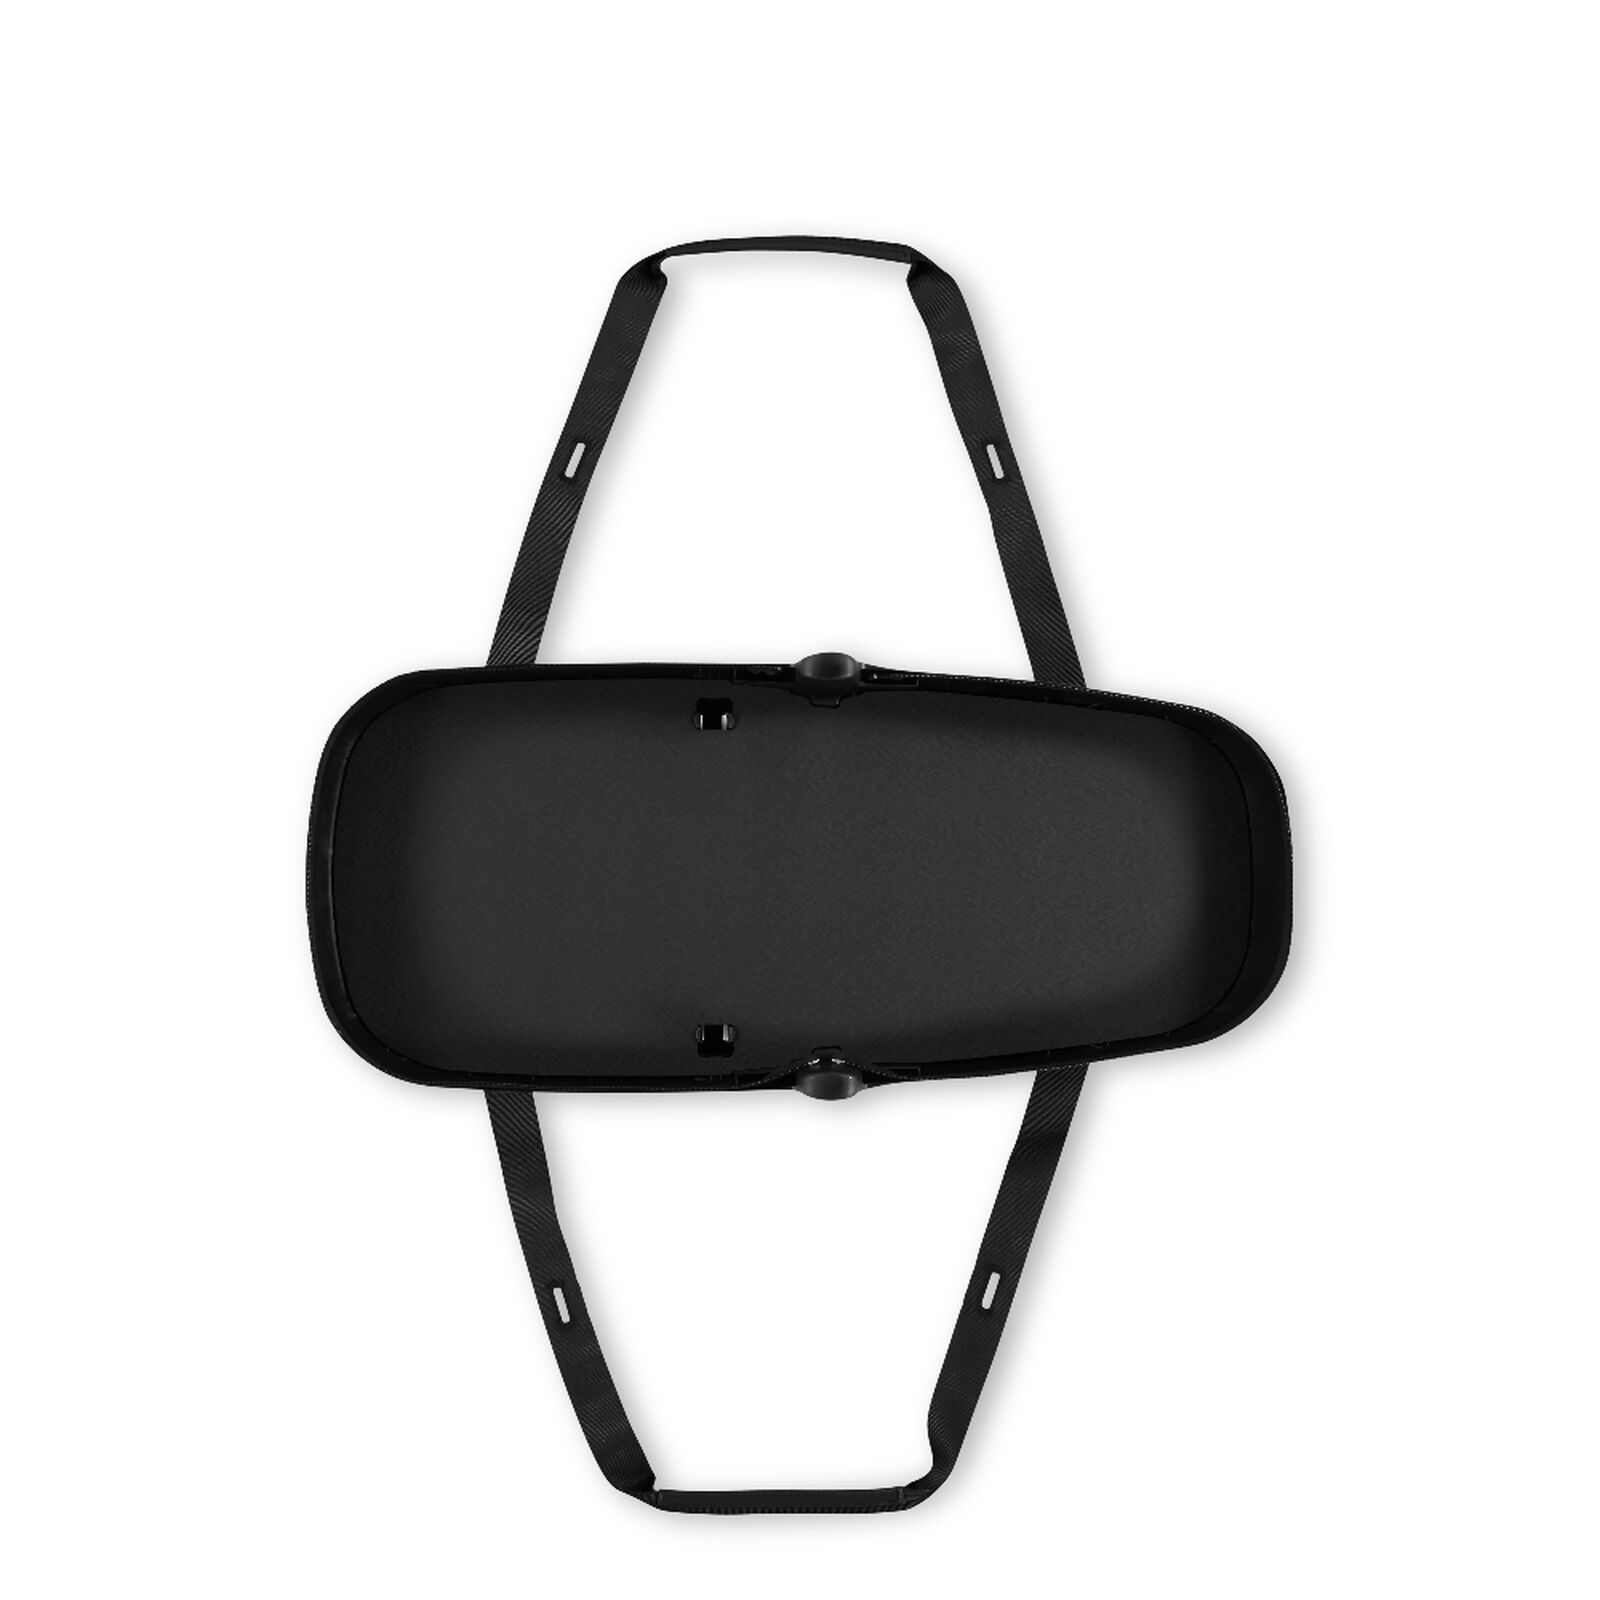 Bugaboo Bee carrycot base replacement set